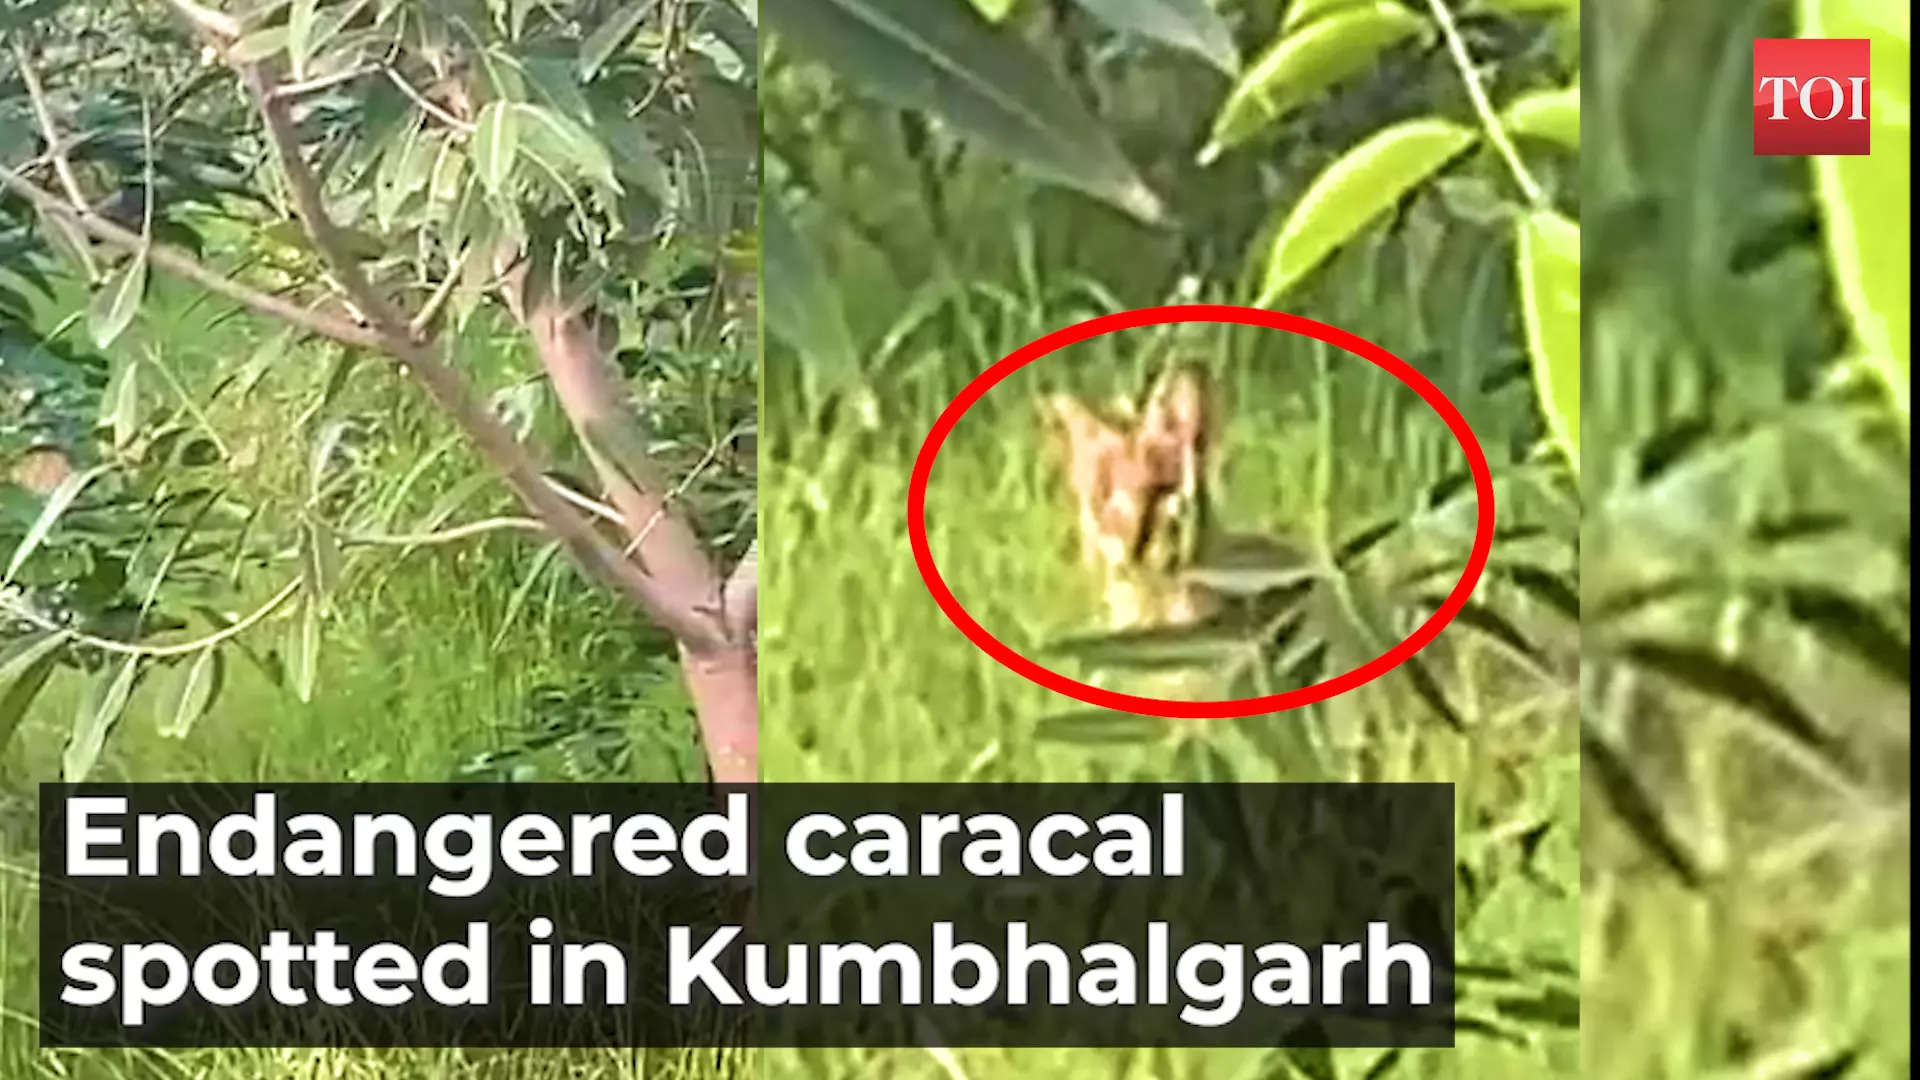 Rajasthan Endangered Wildcat Caracal Spotted In Kumbhalgarh